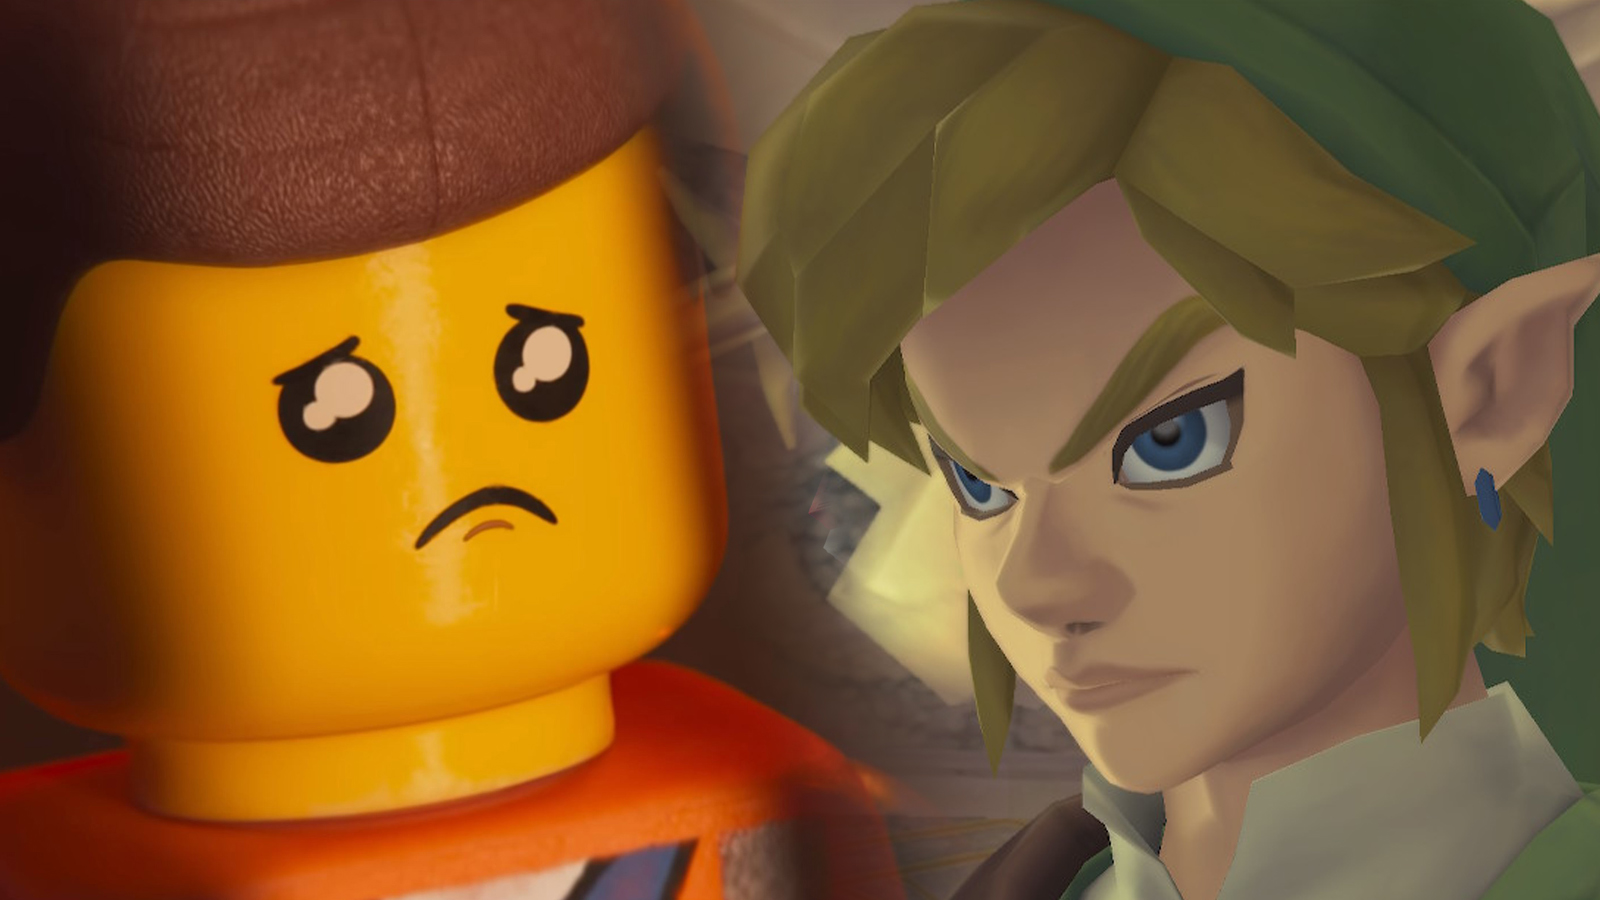 Official Lego Zelda Set Could Be In Production After Lego Cancels